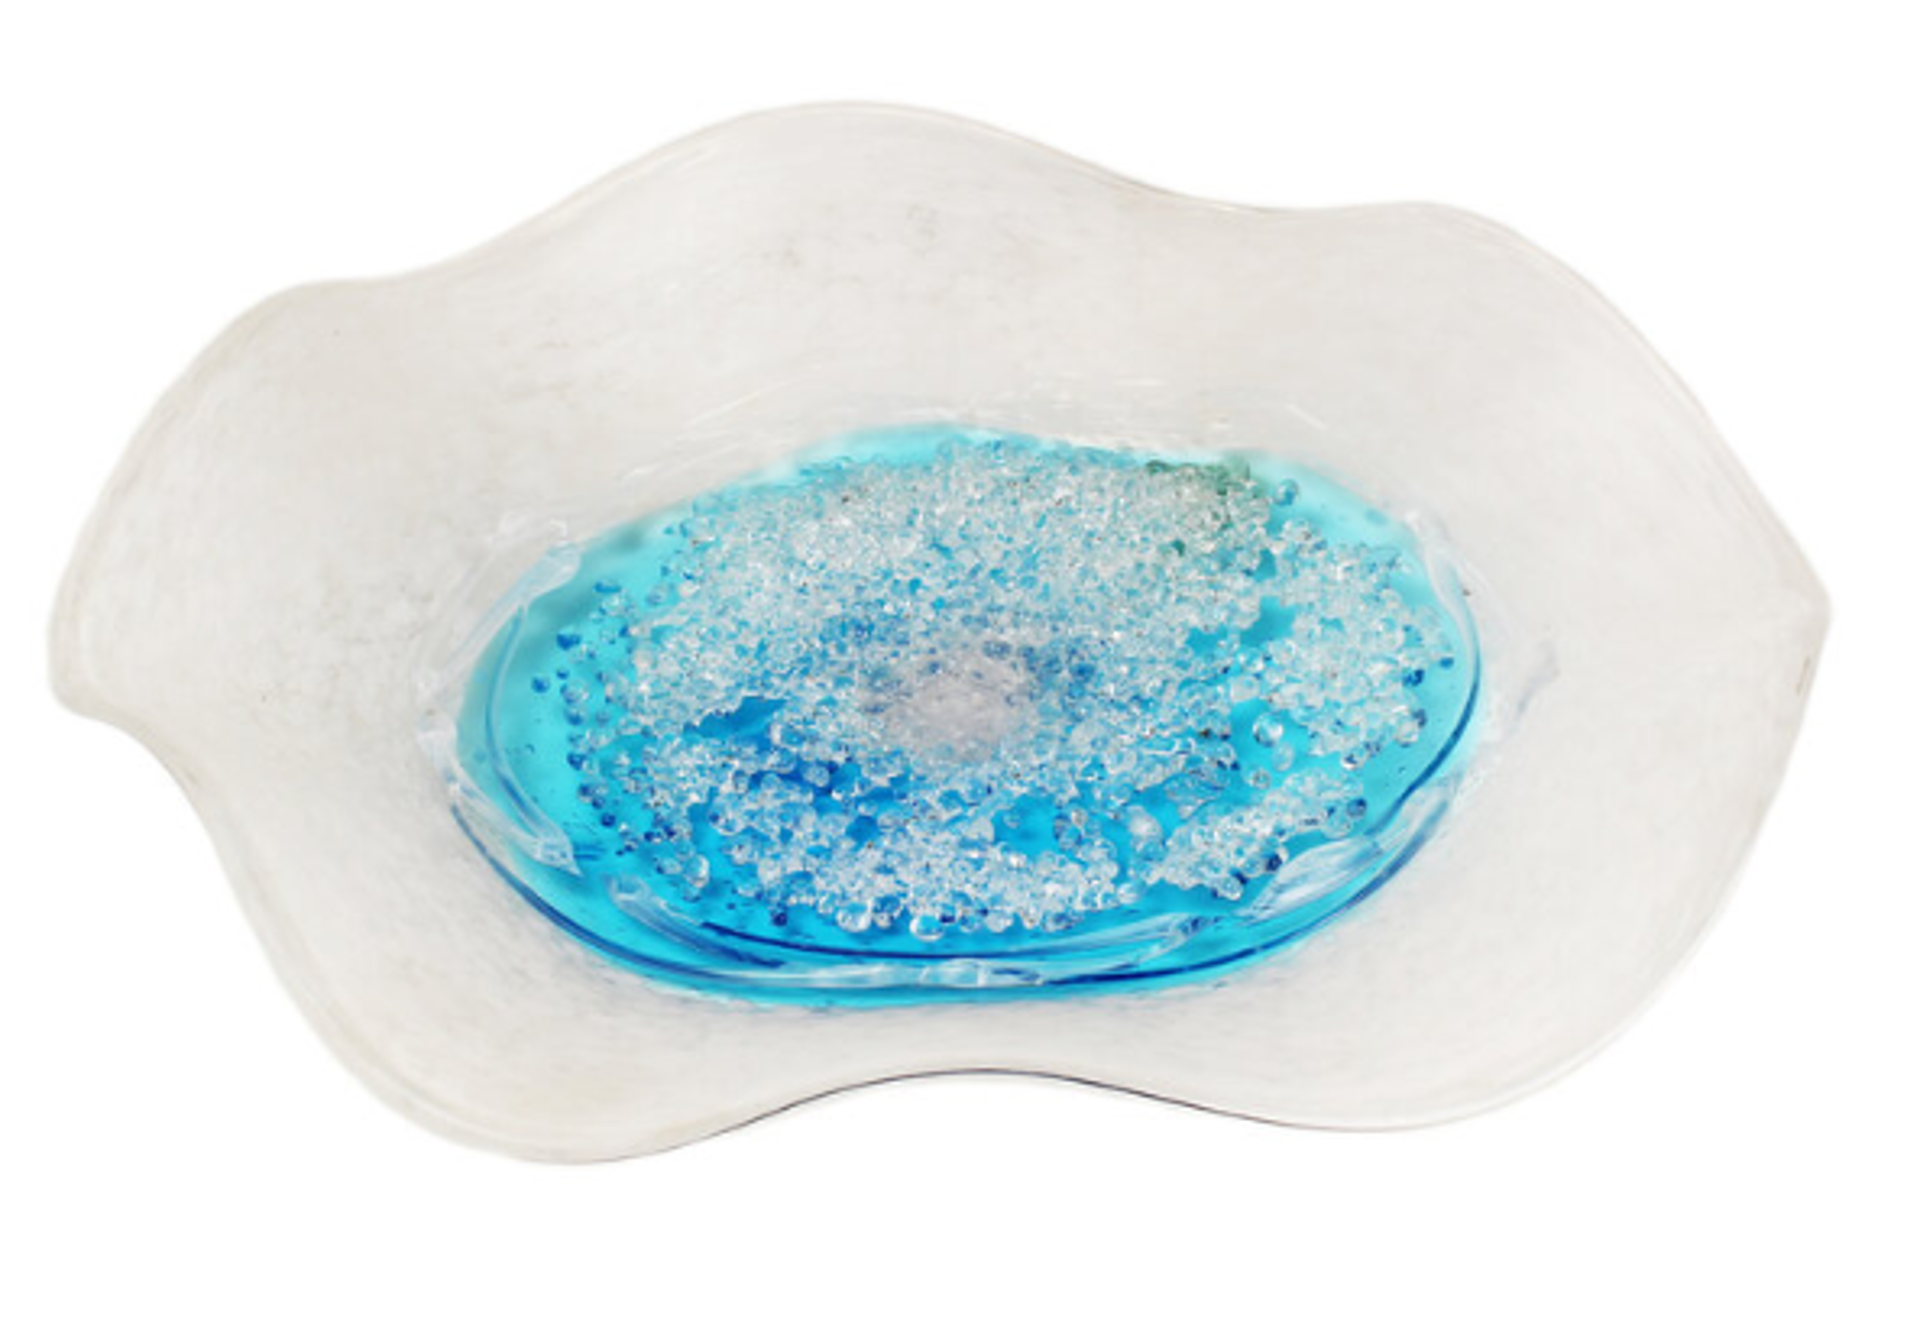 Hard Candy Round Table Dish - 7328TB by V Handblown Glass